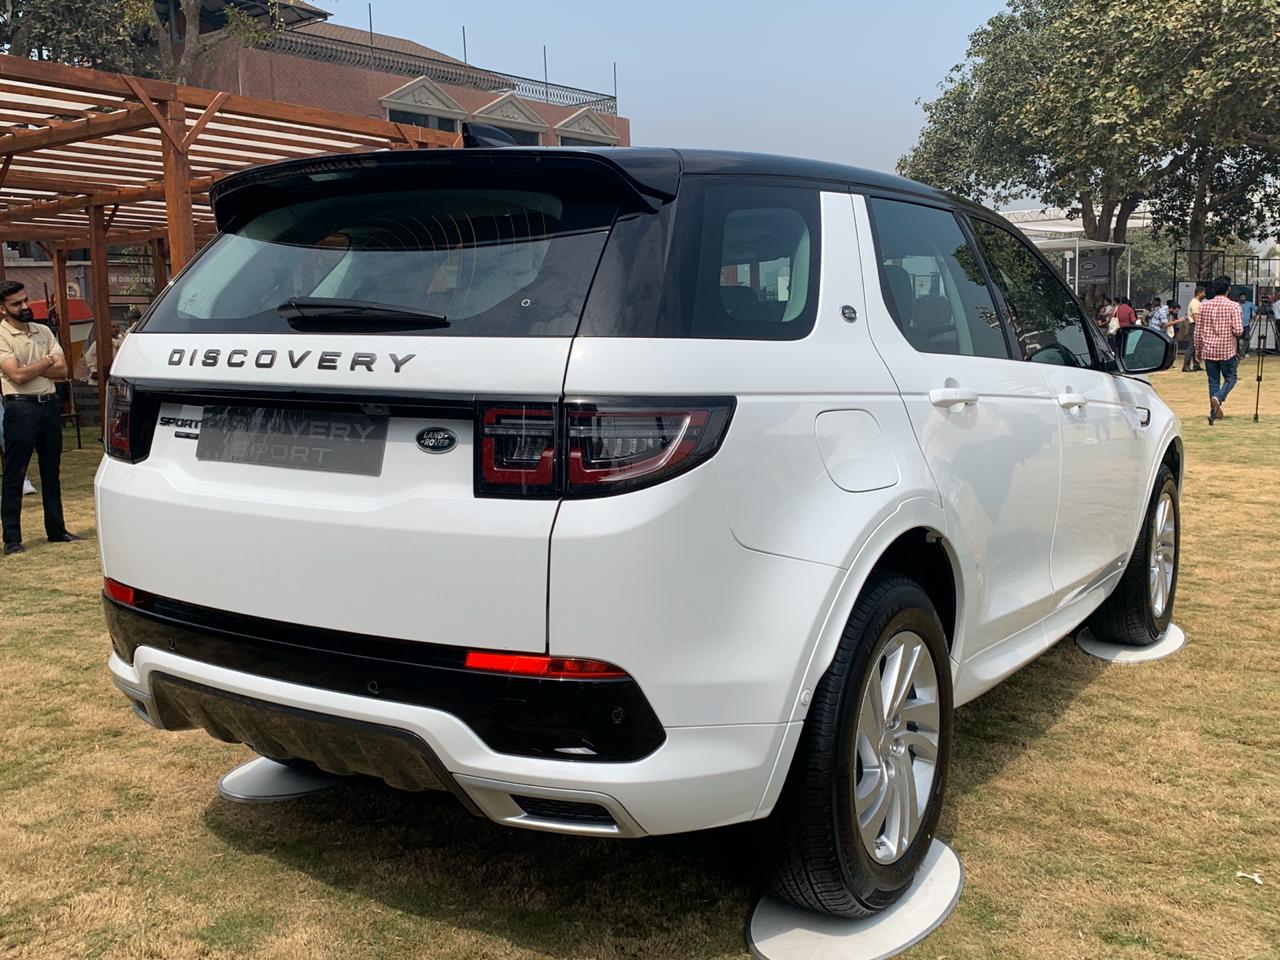 2020 Land Rover Discovery Sport 7Seater SUV launched at